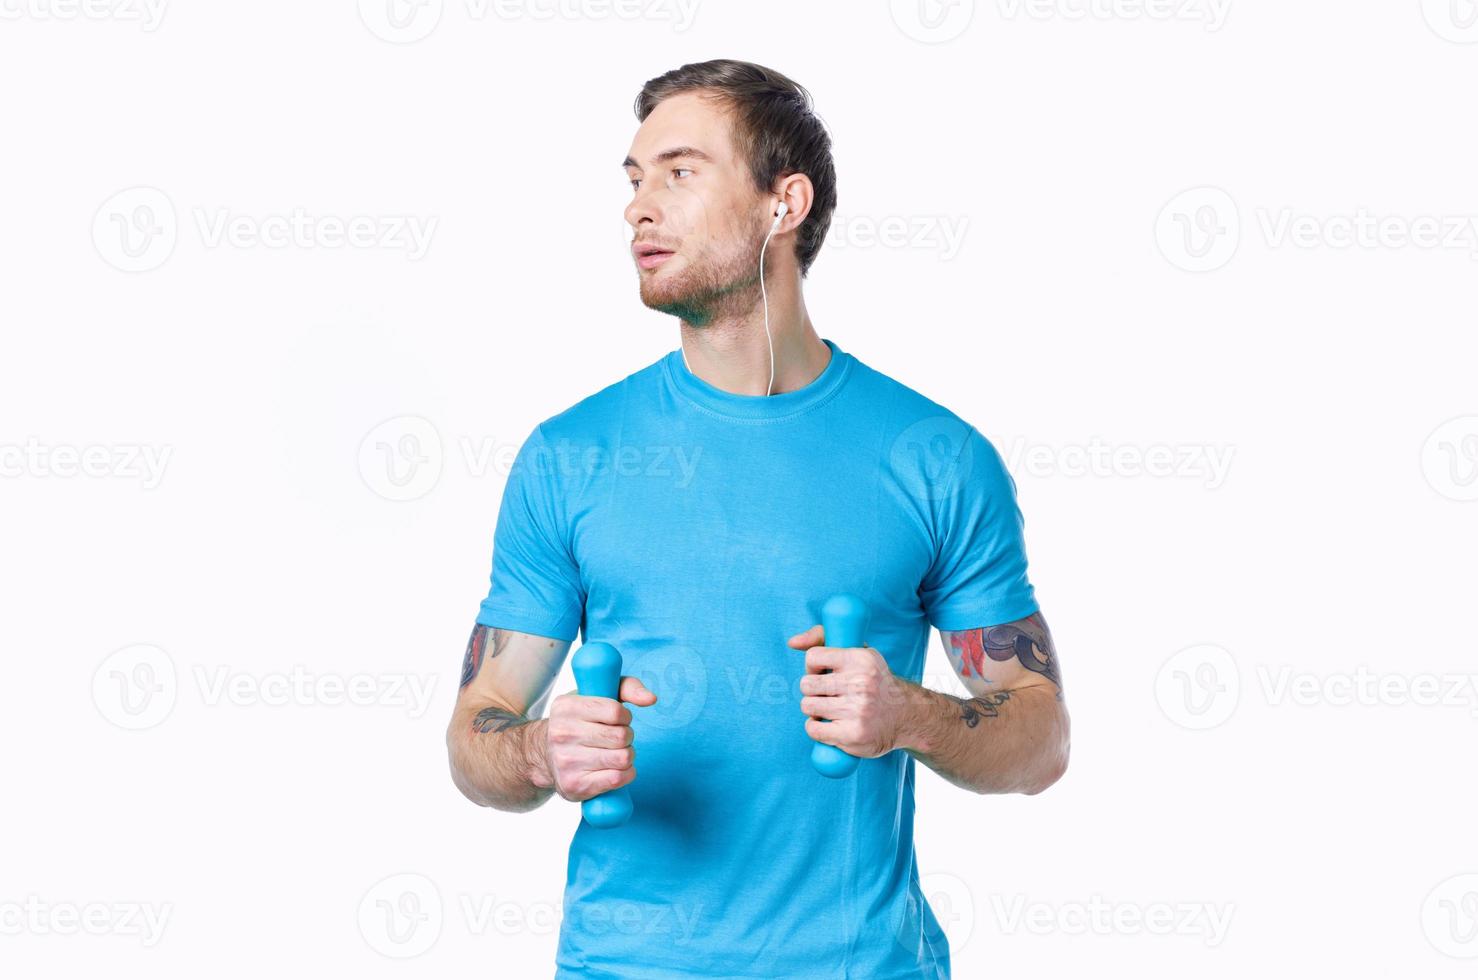 man with dumbbells in a blue t-shirt on a light background looking to the side cropped view photo